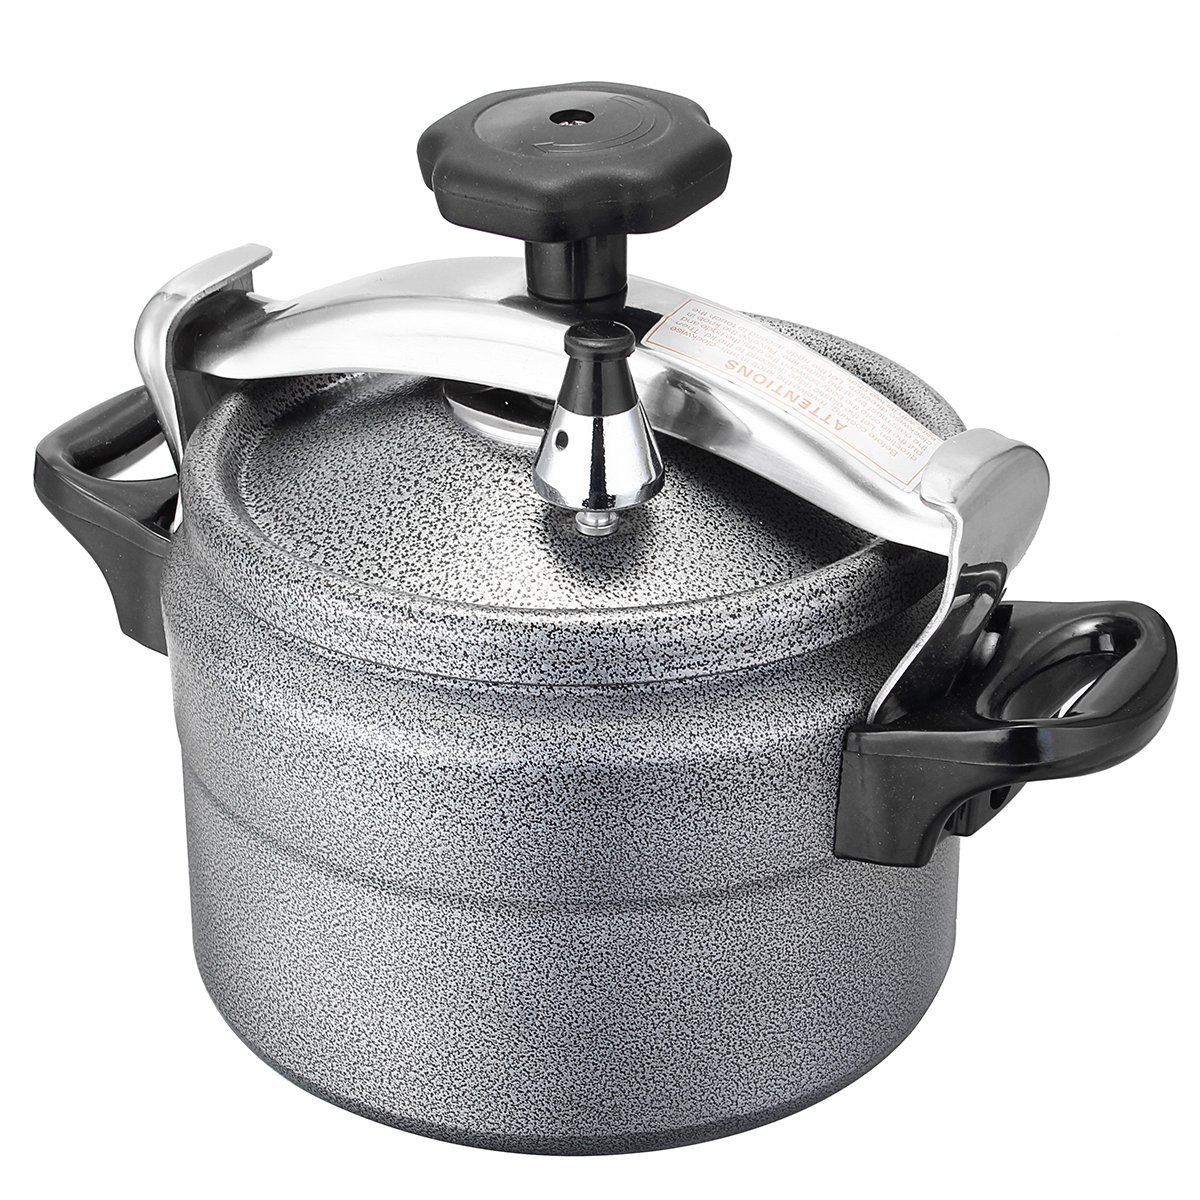 Slkima 3L Portable Aluminium Pressure Rice Cooker Stovetop Cooking Pot for  Outdoor Camping